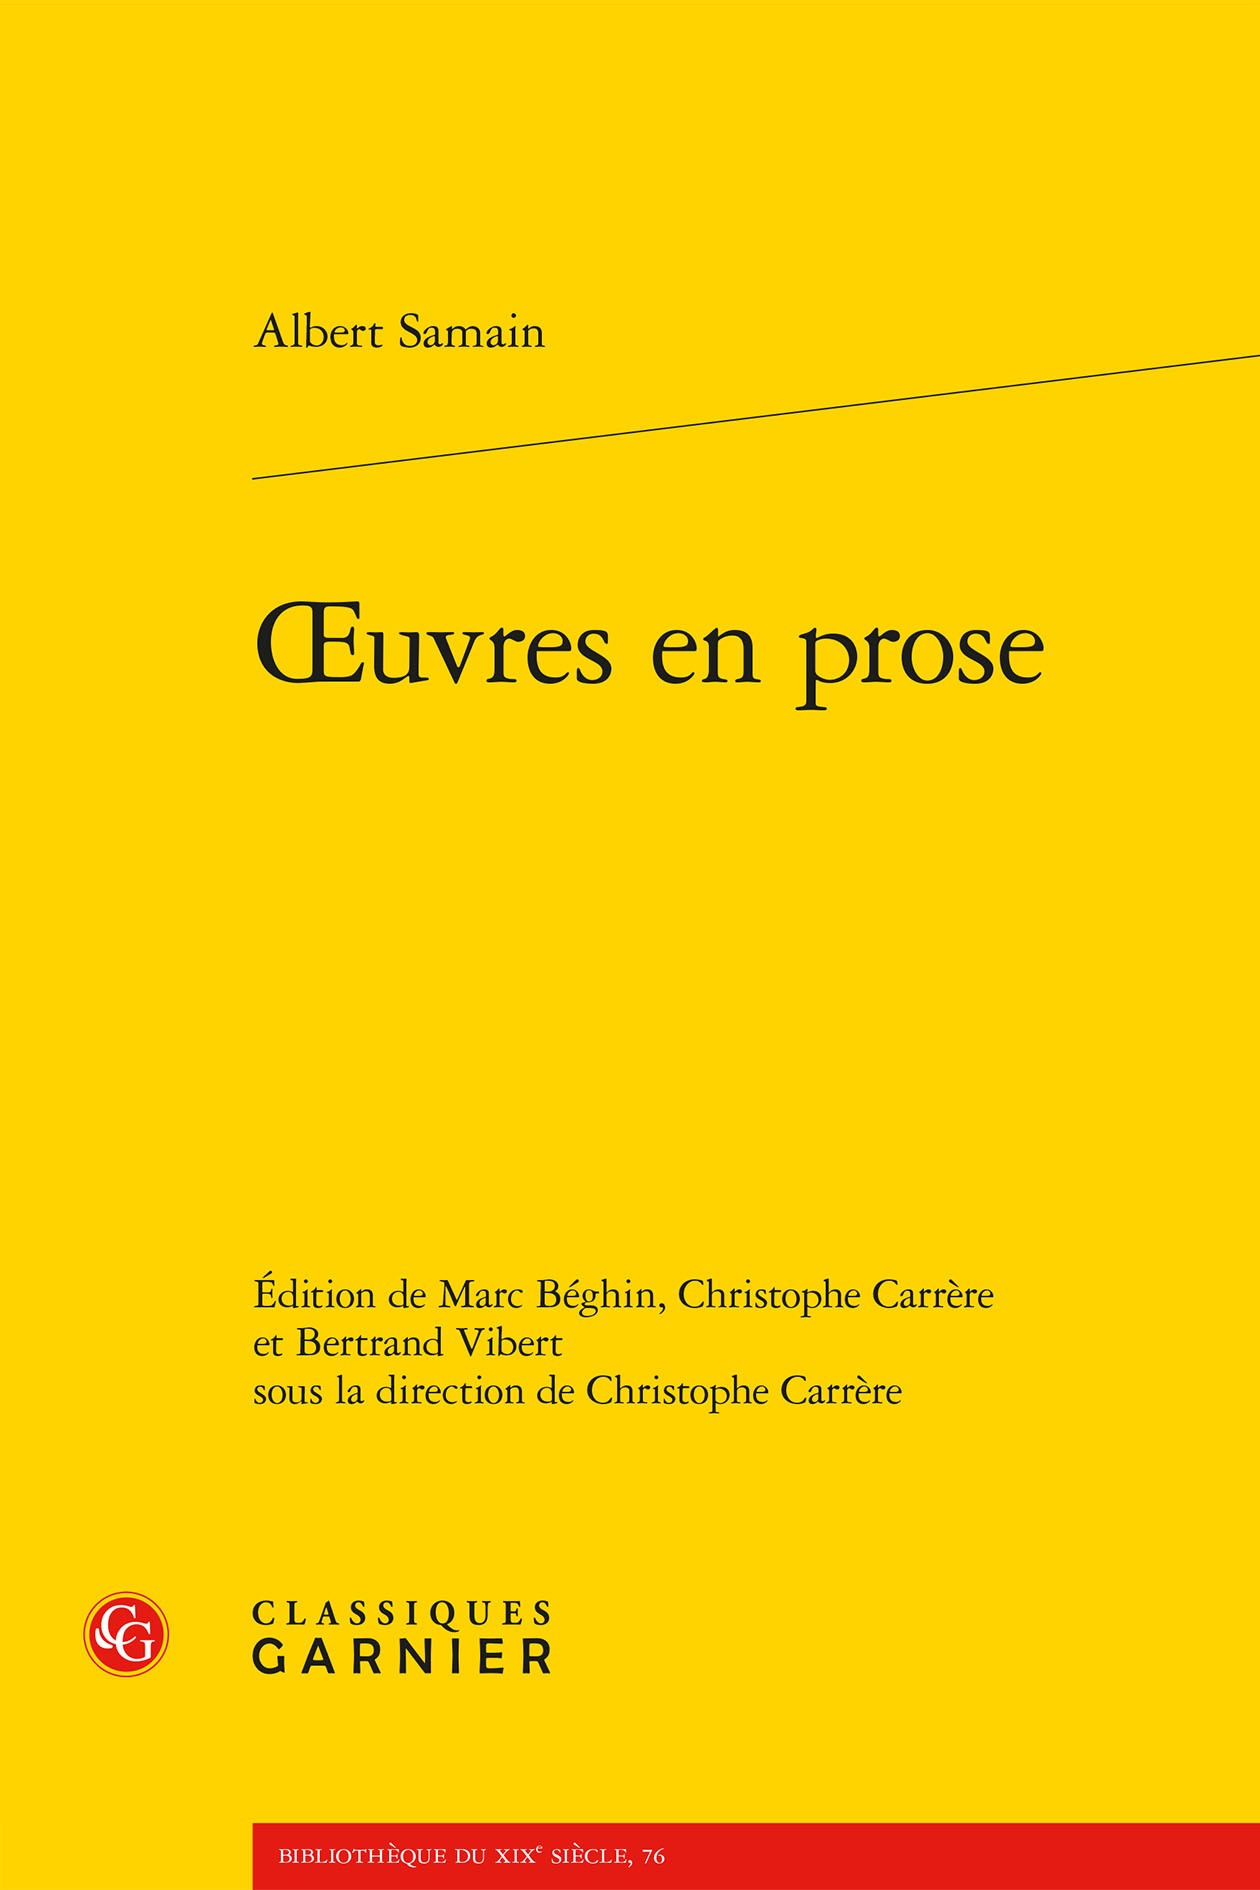 oeuvres en prose (9782406099925-front-cover)